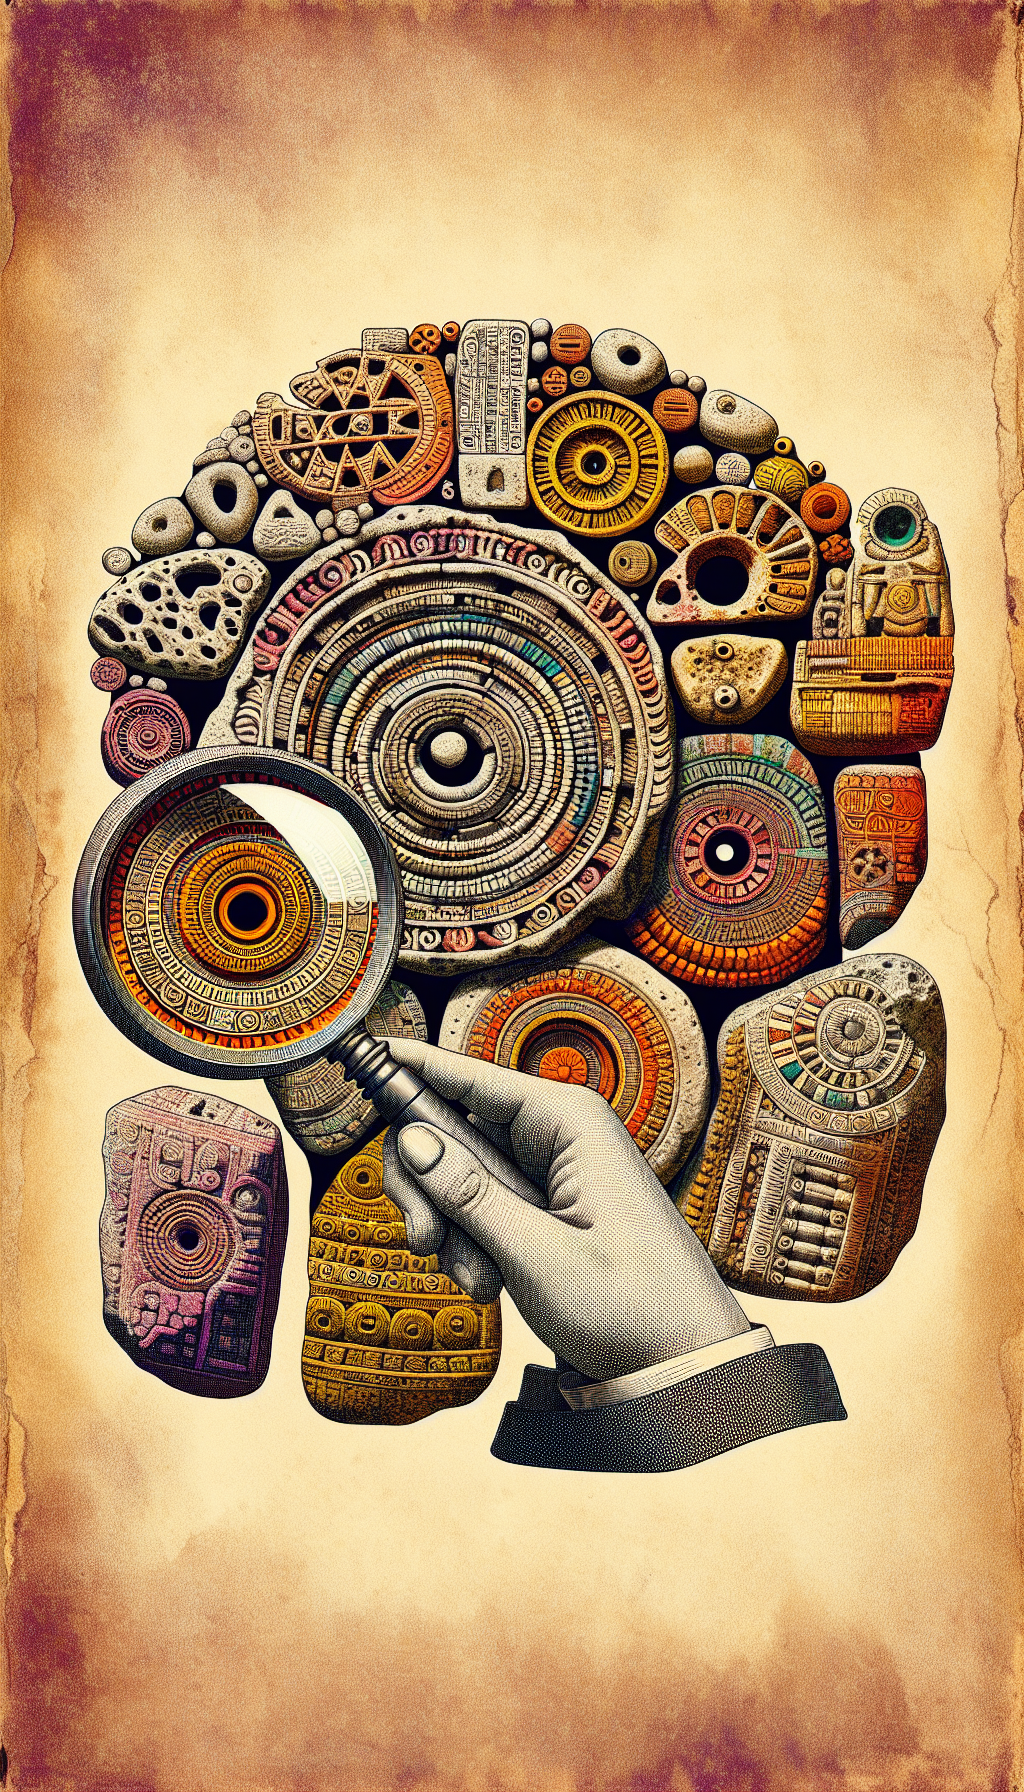 An illustration in a collage style, featuring an intricate tapestry of ancient drilled stones and Indian artifacts, with a magnifying glass held over a rock, revealing detailed inscriptions and symbols within the hole. The juxtaposition of the realistic artifact textures with the vibrant, almost cartoonish magnifying glass creates a striking visual metaphor for the process of uncovering and deciphering the past.